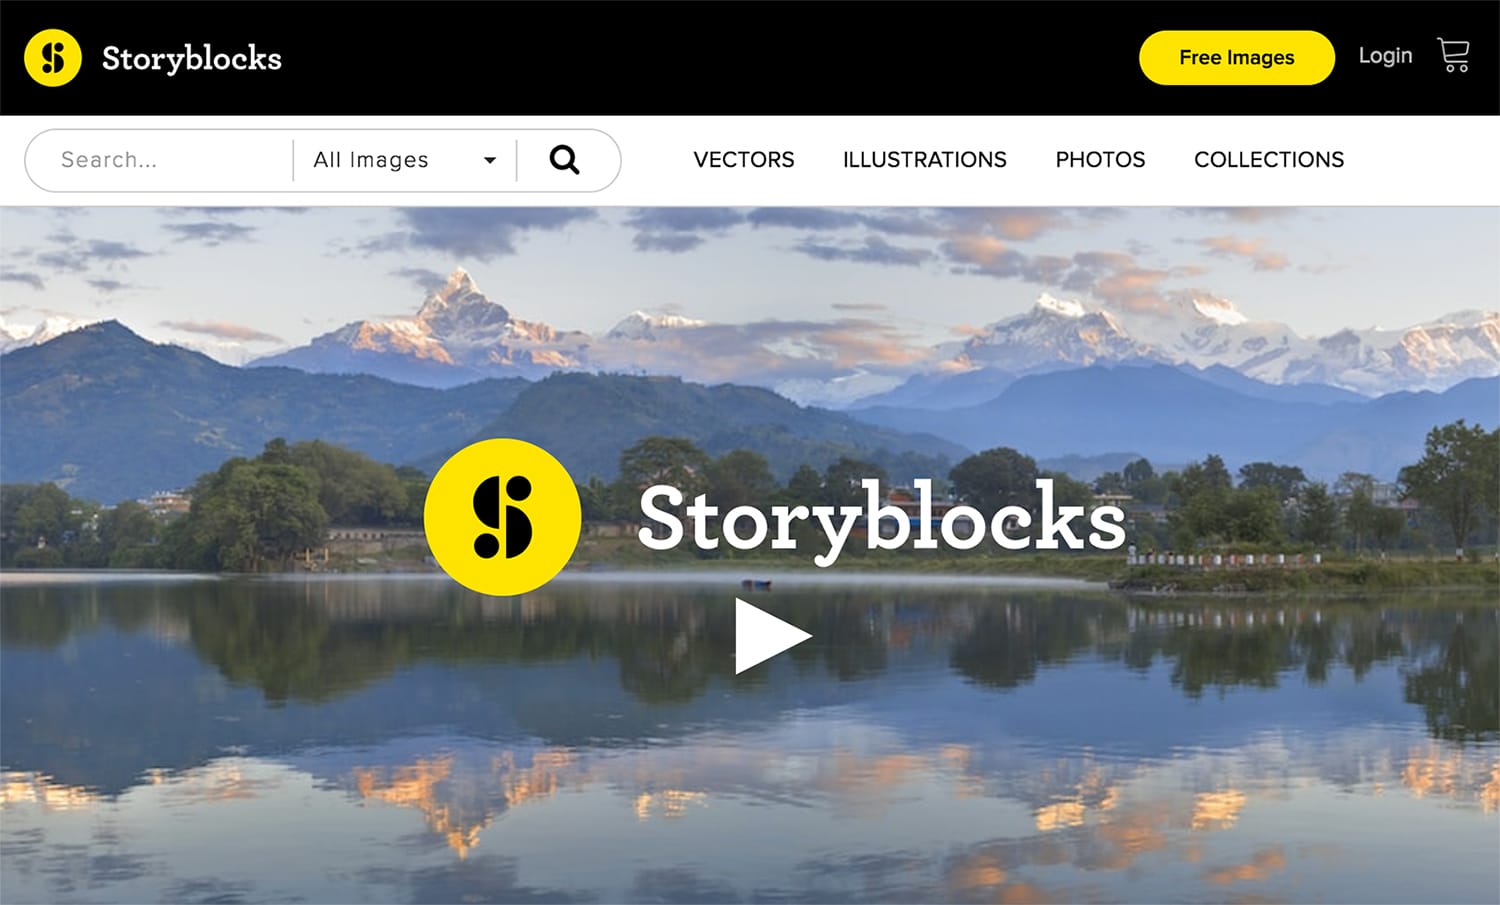 Download Anything You Want on Storyblocks